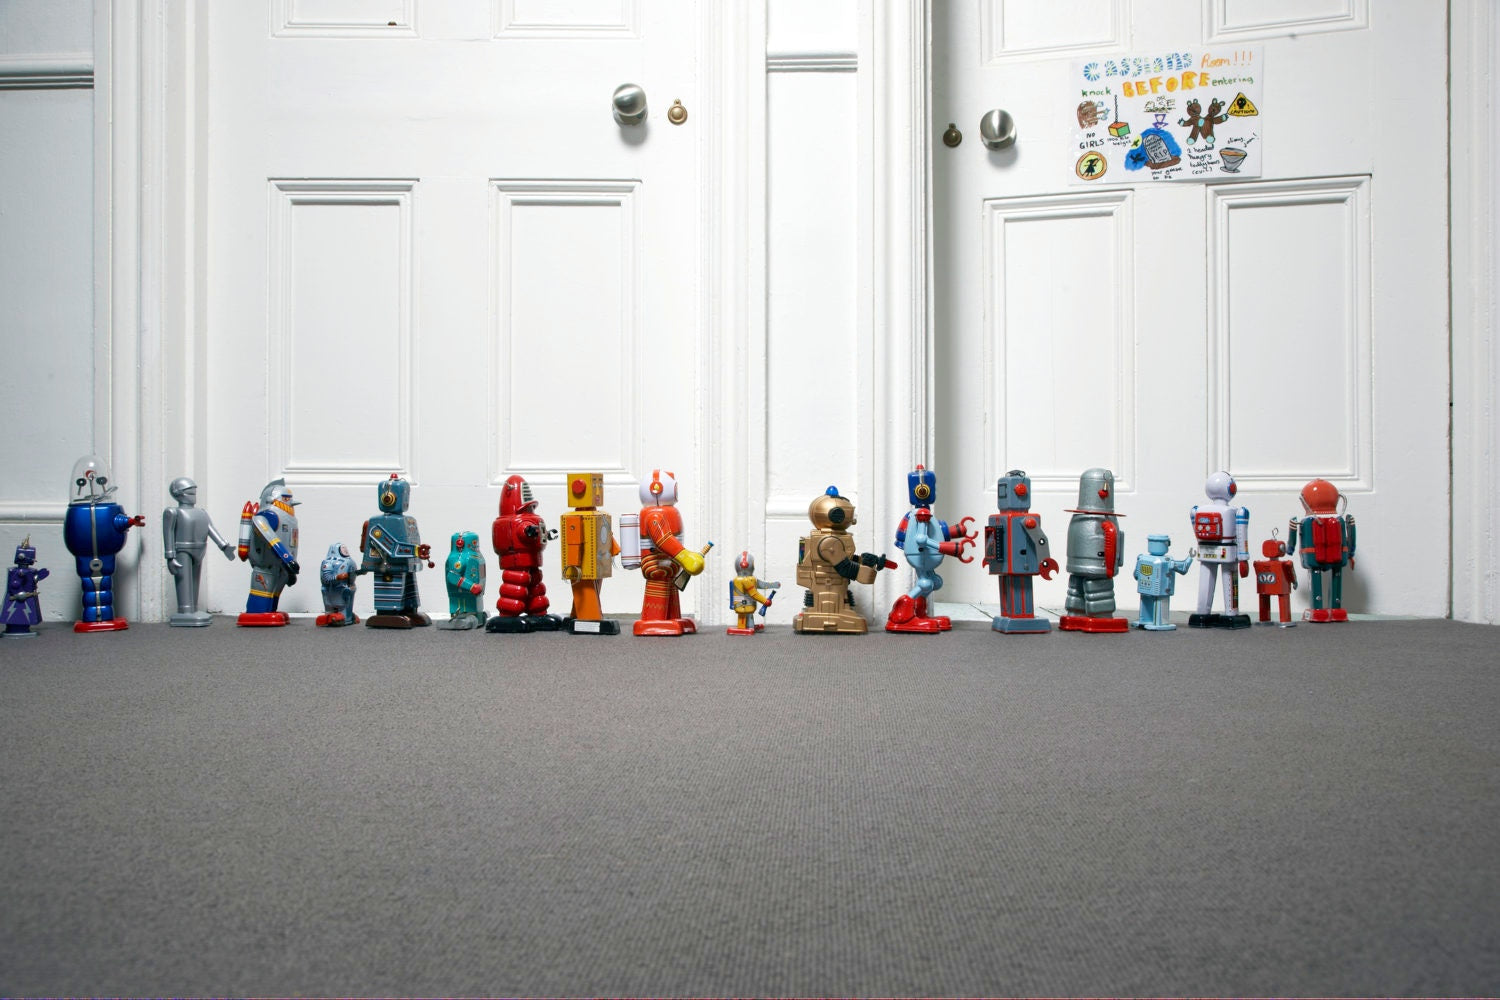 Robot toys arranged in a sequence